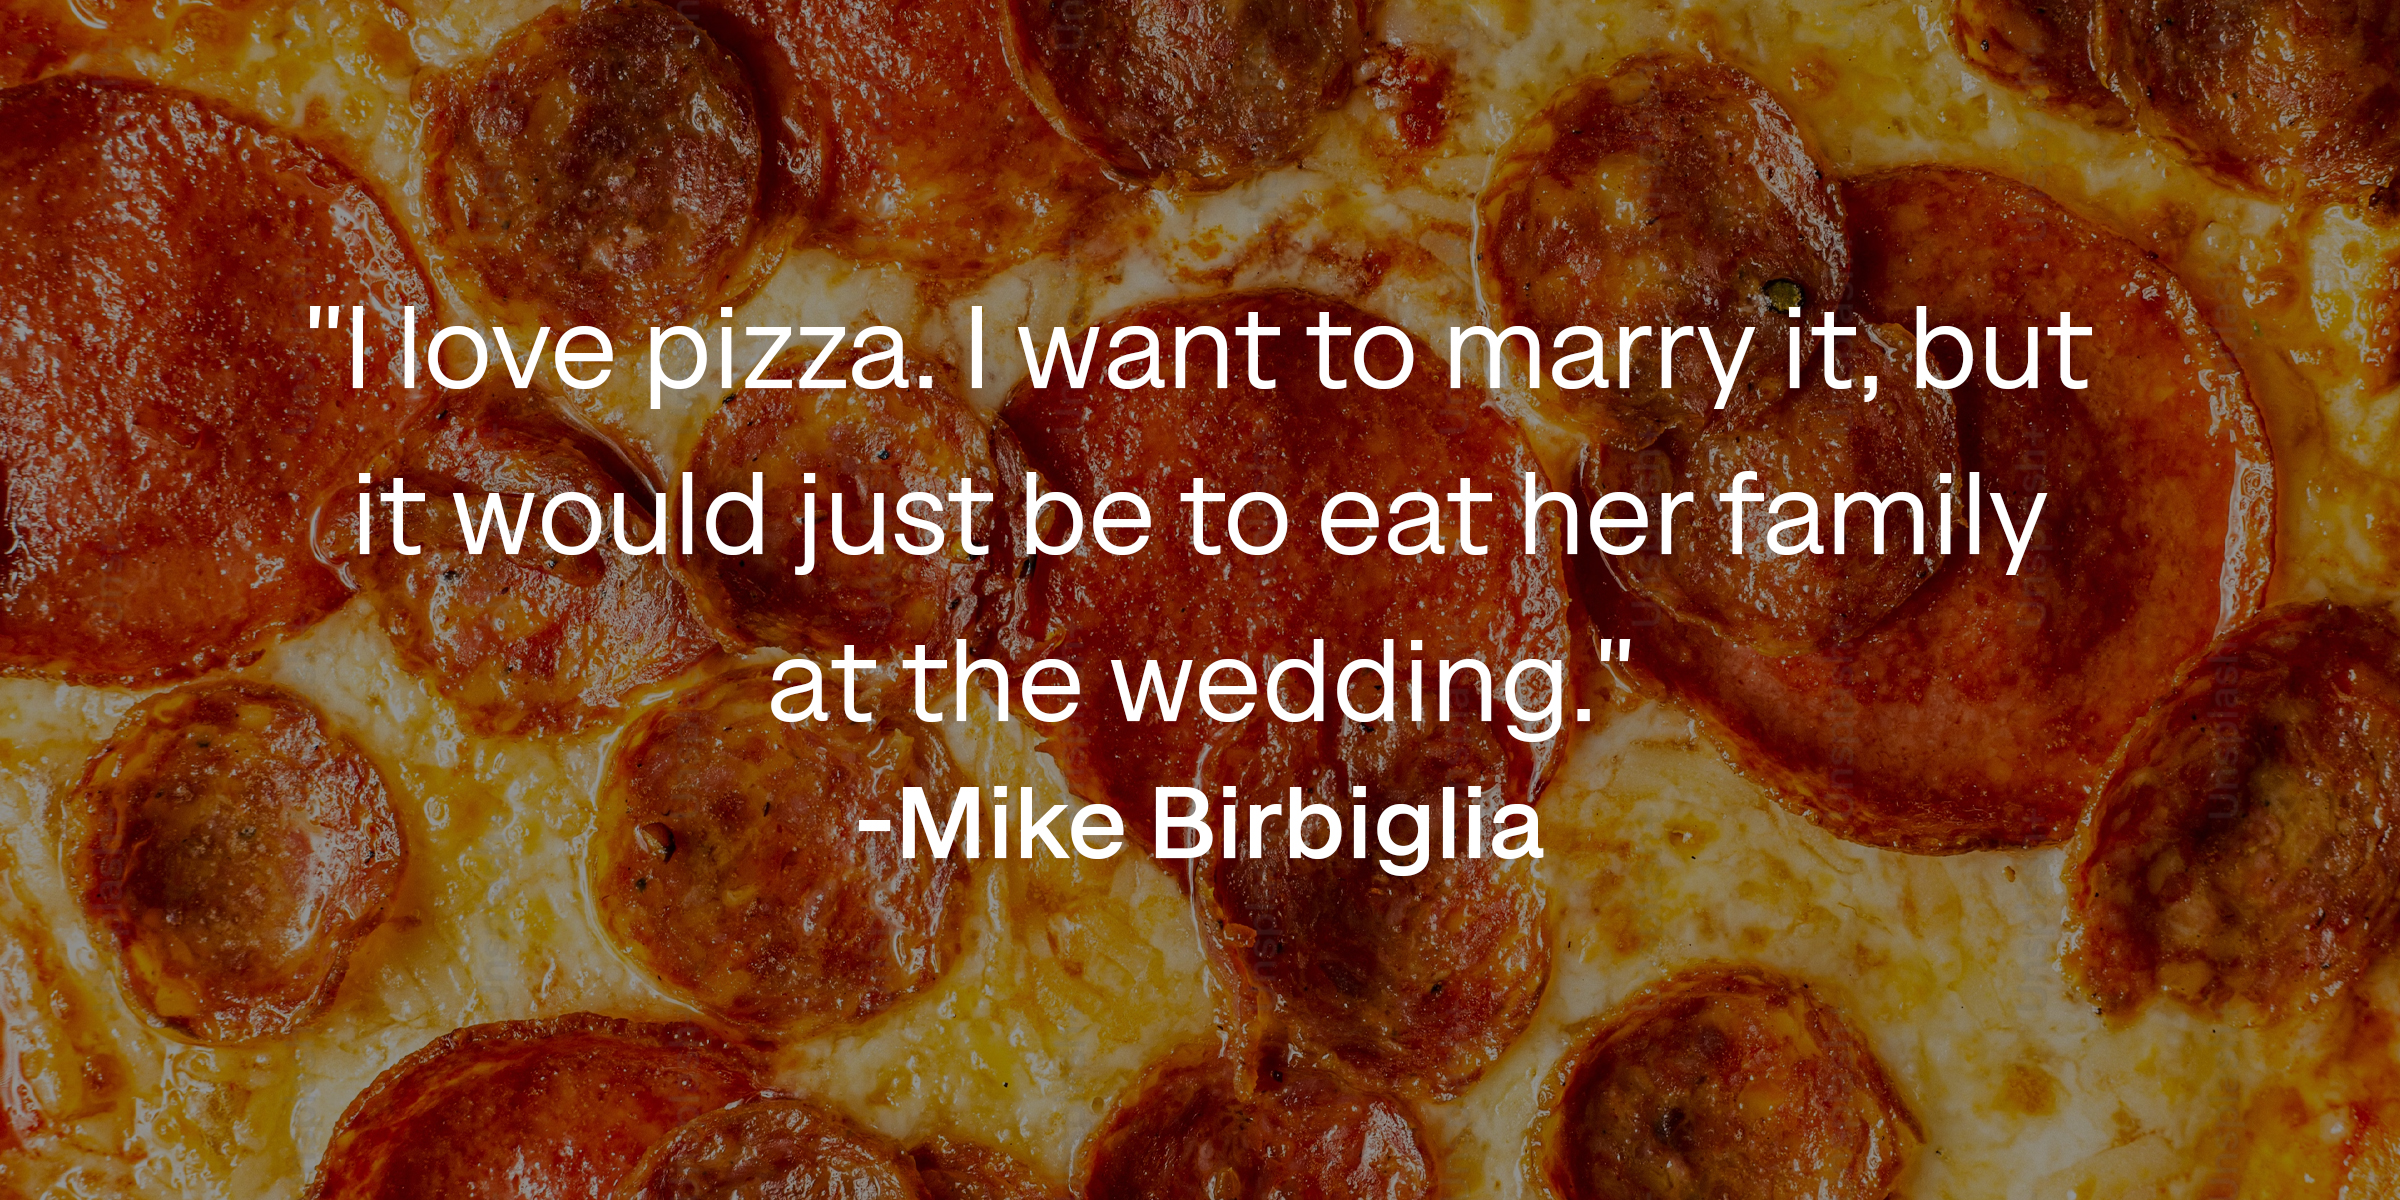 Mike Birbiglia's quote: "I love pizza. I want to marry it, but it would just be to eat her family at the wedding." | Source: shutterandmint